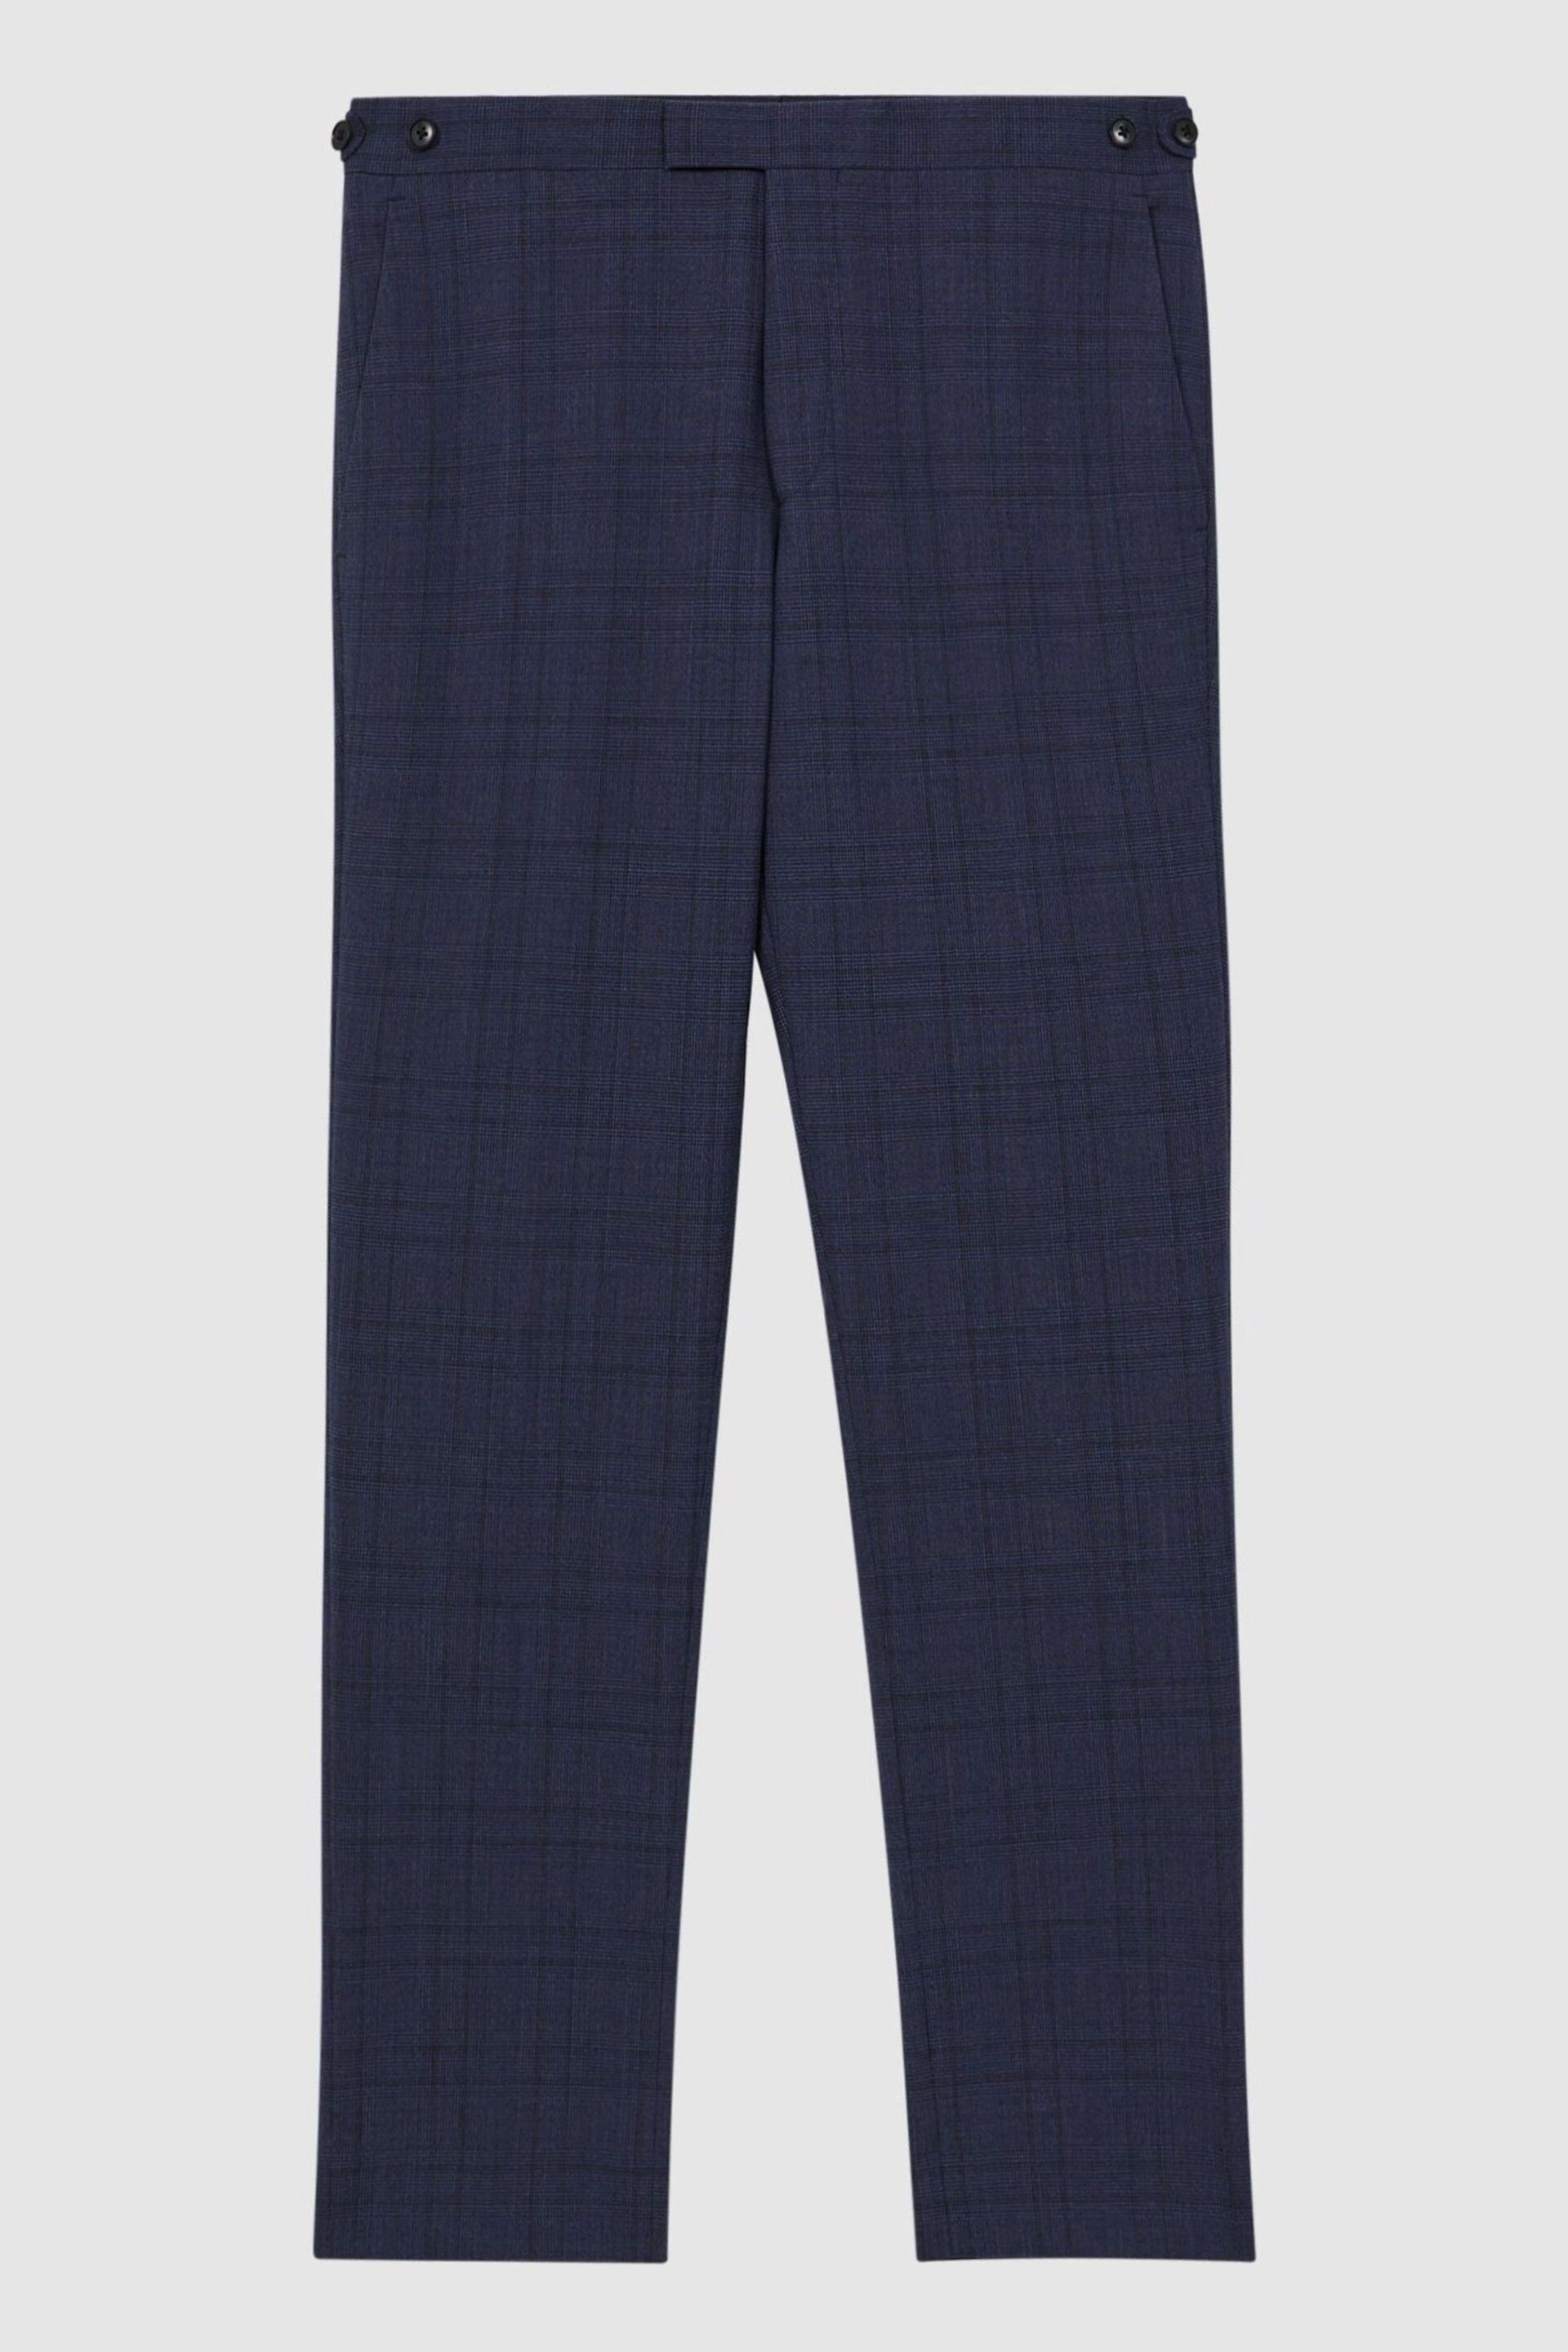 Reiss Indigo City Slim Fit Wool Checked Trousers - Image 2 of 4